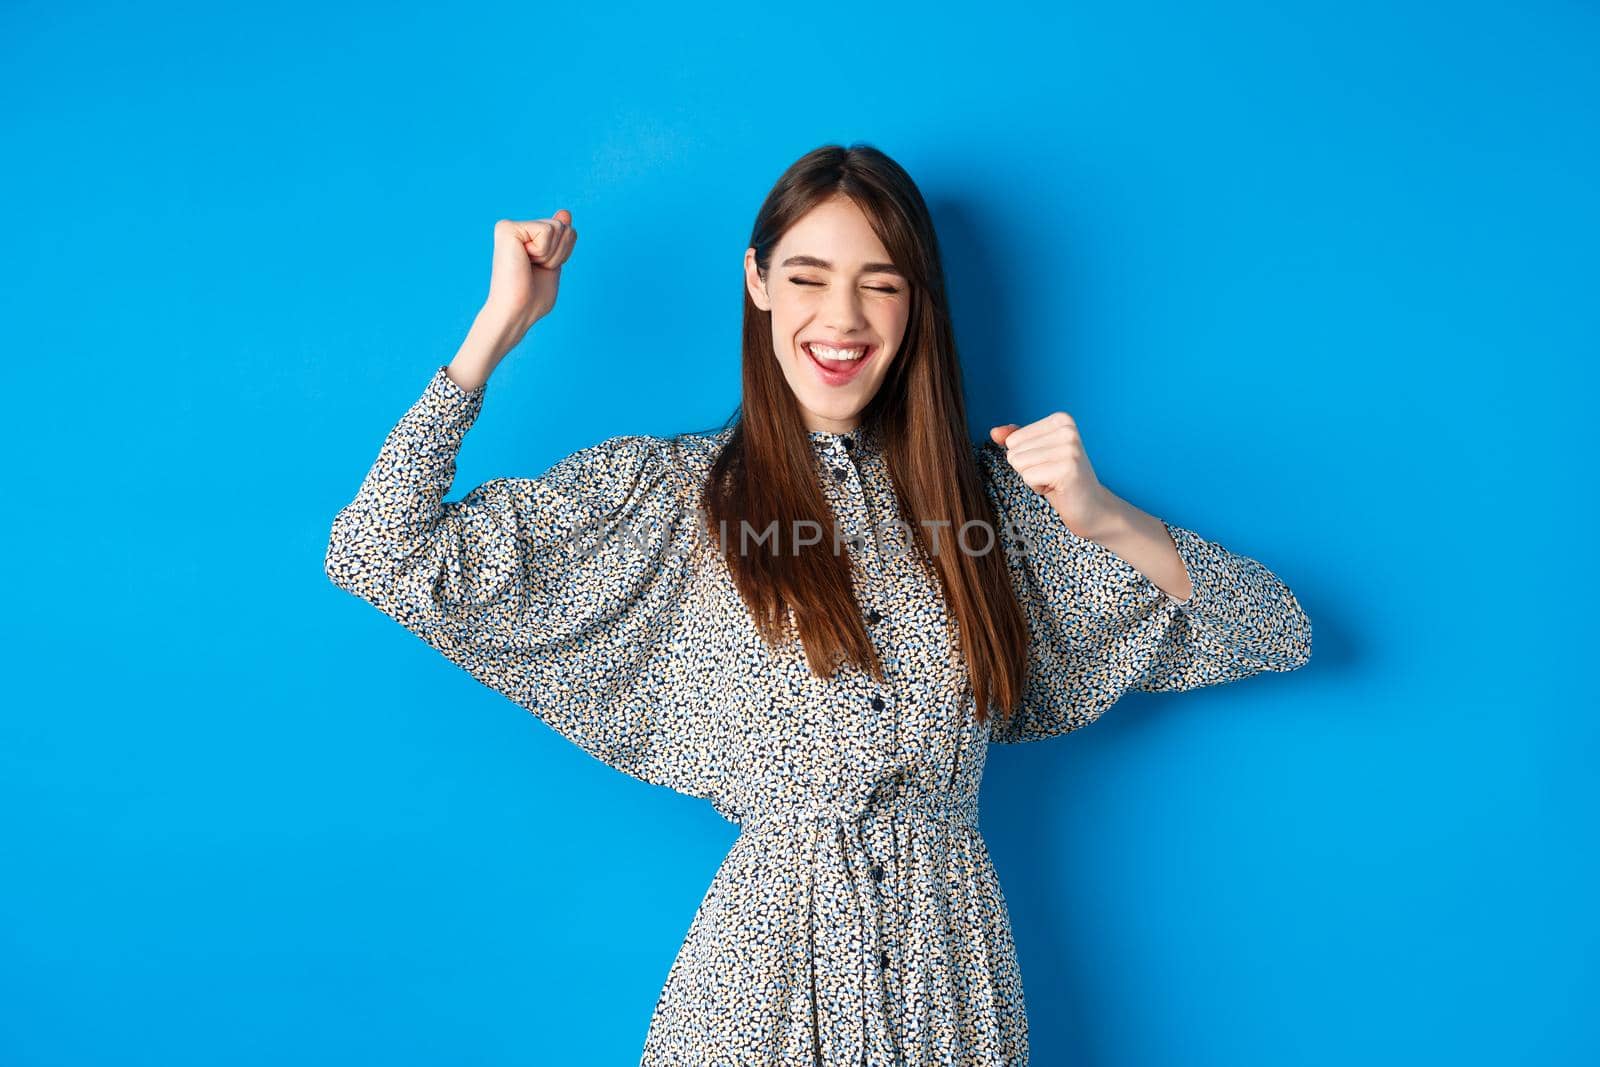 Excited smiling girl showing tongue and dancing with raised hands, celebrating victory or achievement, winning prize, standing happy on blue background.